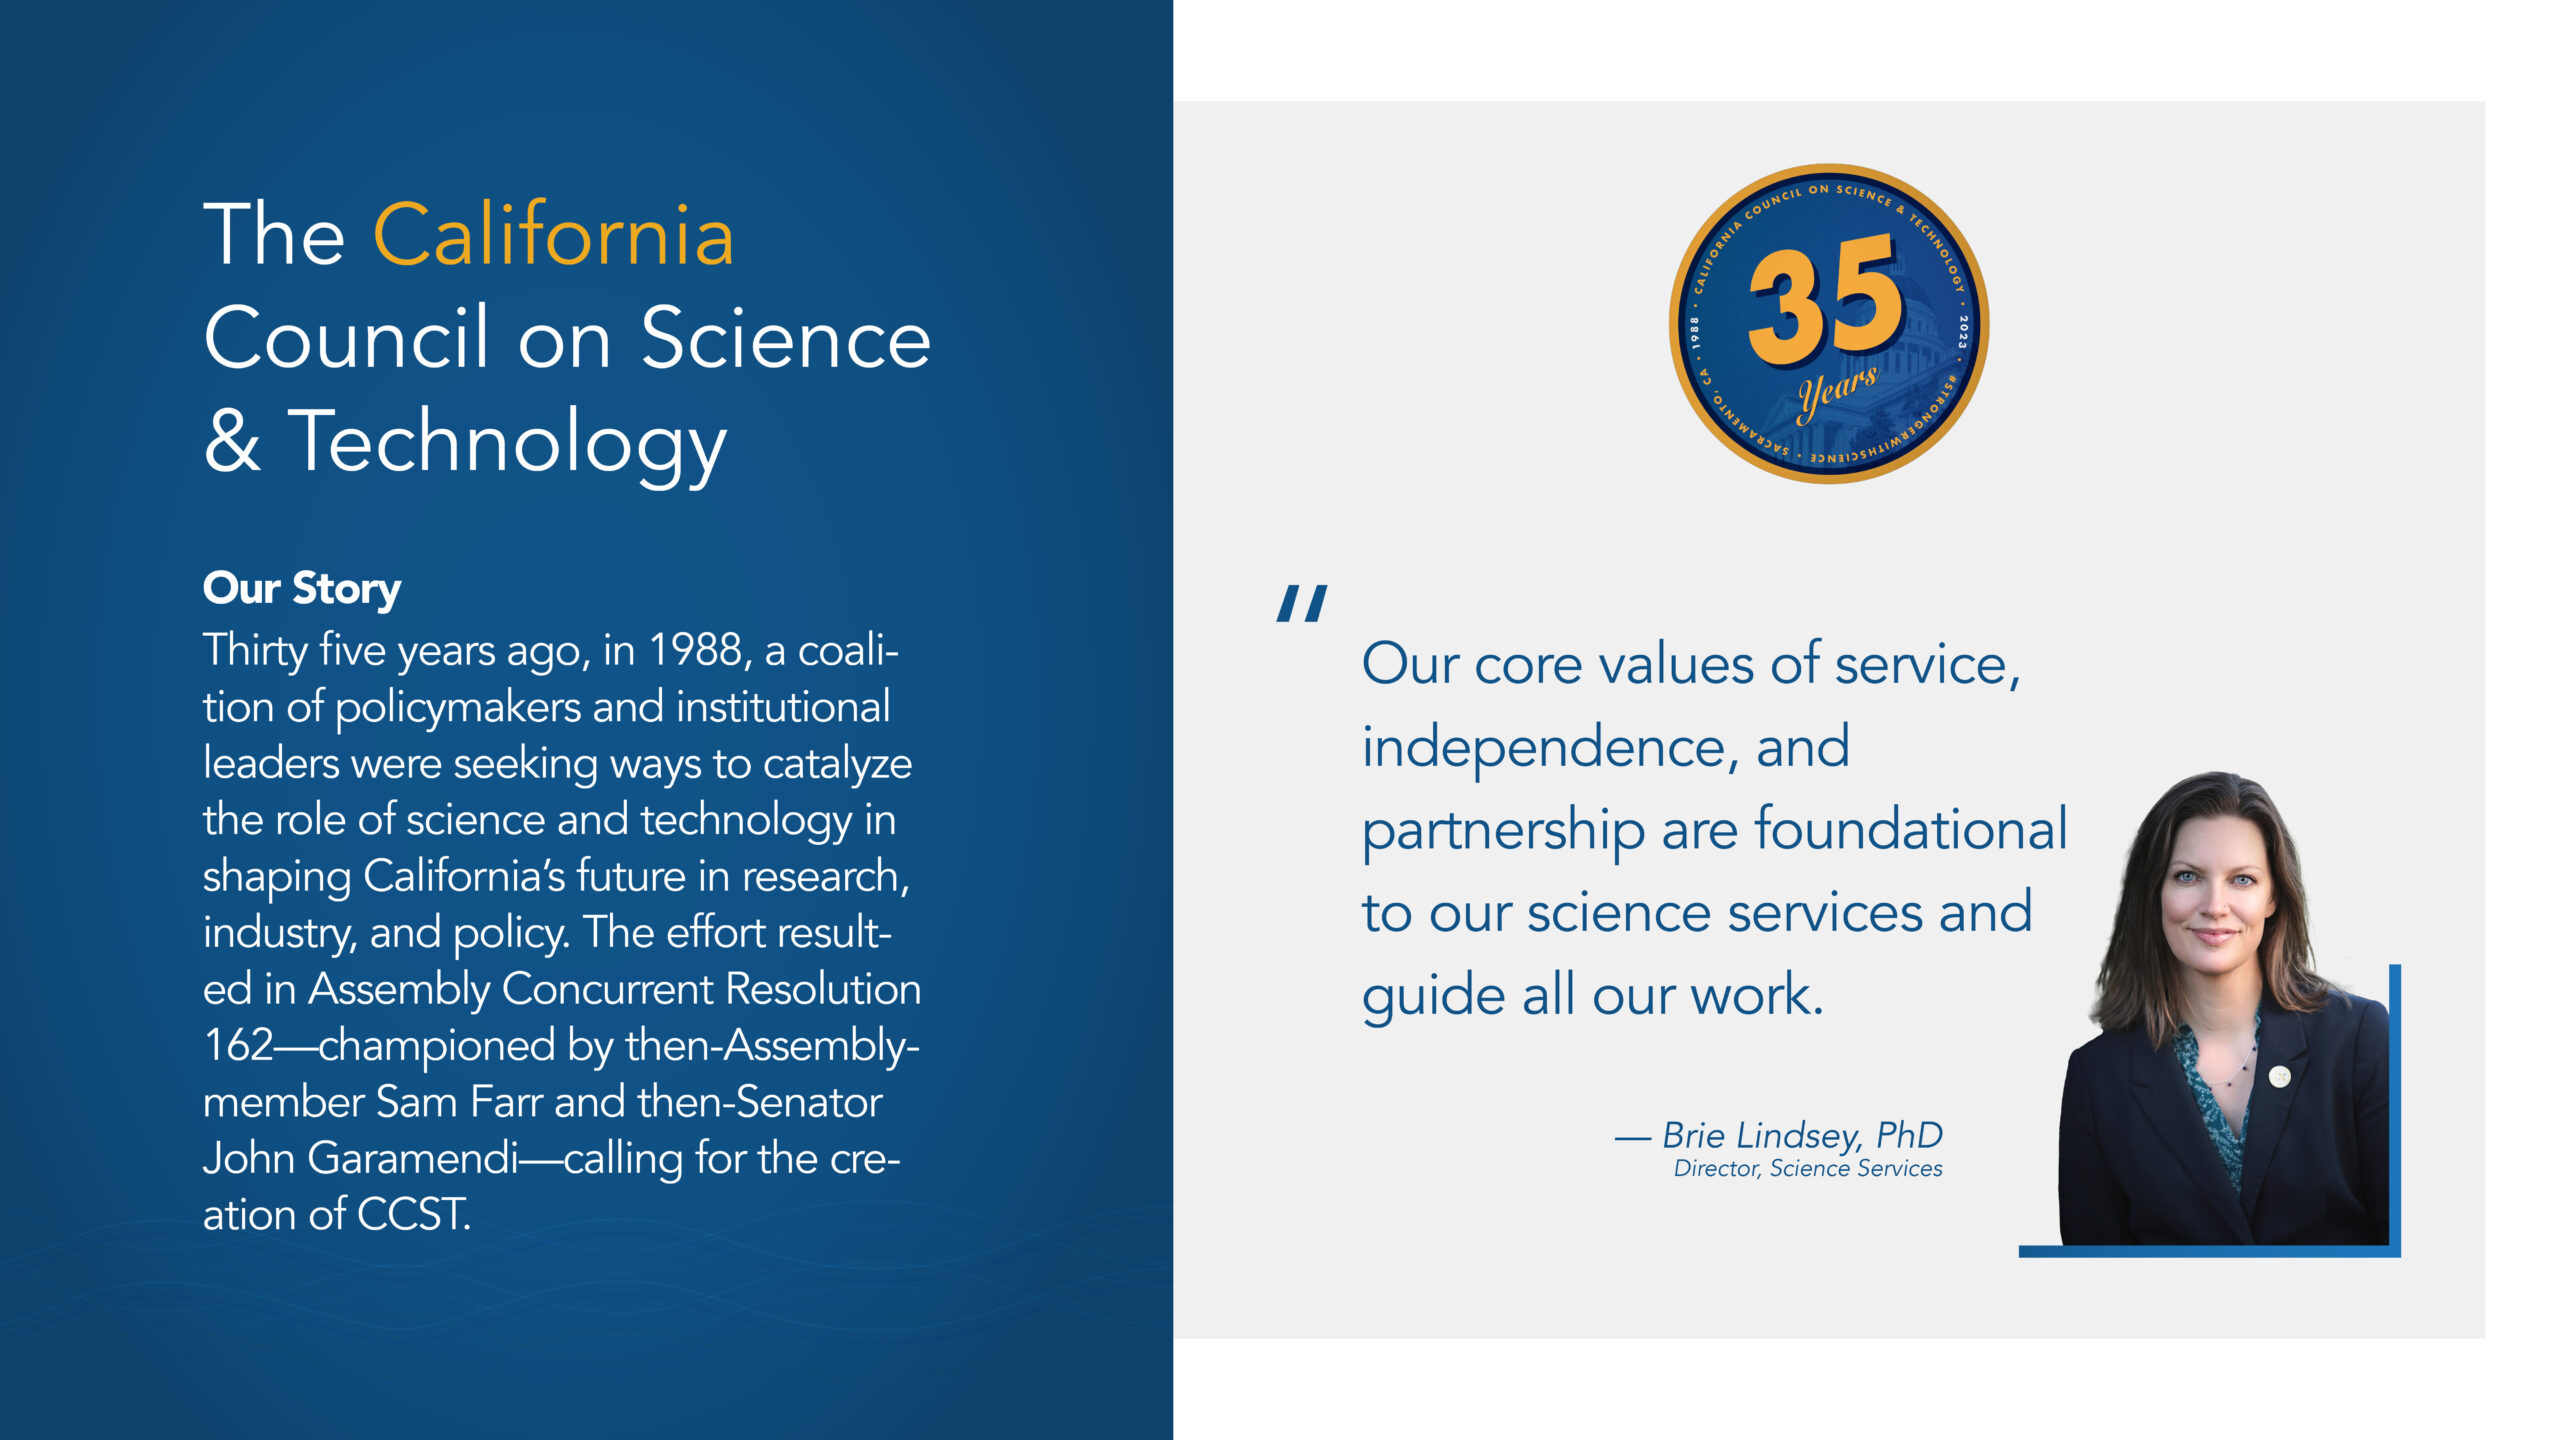 A graphic with a blue background on the left side and a column of text about CCST's story, and a right column with a gray background featuring a quote and photo of Brie Lindsey about our science services: "Our core values of service, independence, and partnership are foundational to our science services and guide all of our work."